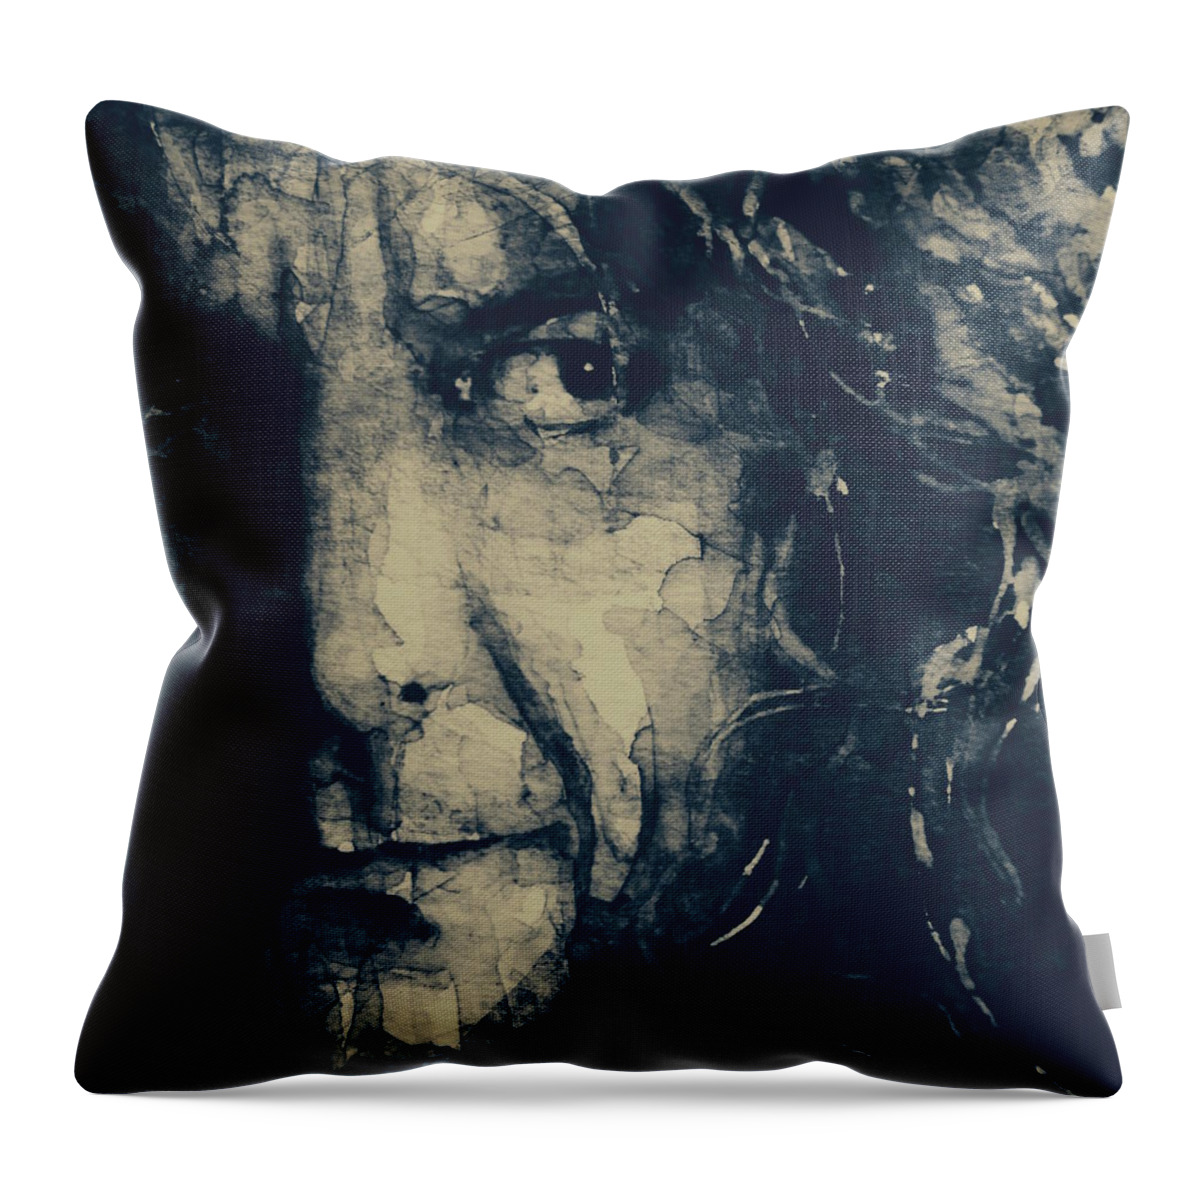 Robert Plant Throw Pillow featuring the mixed media Robert Plant - Led Zeppelin by Paul Lovering